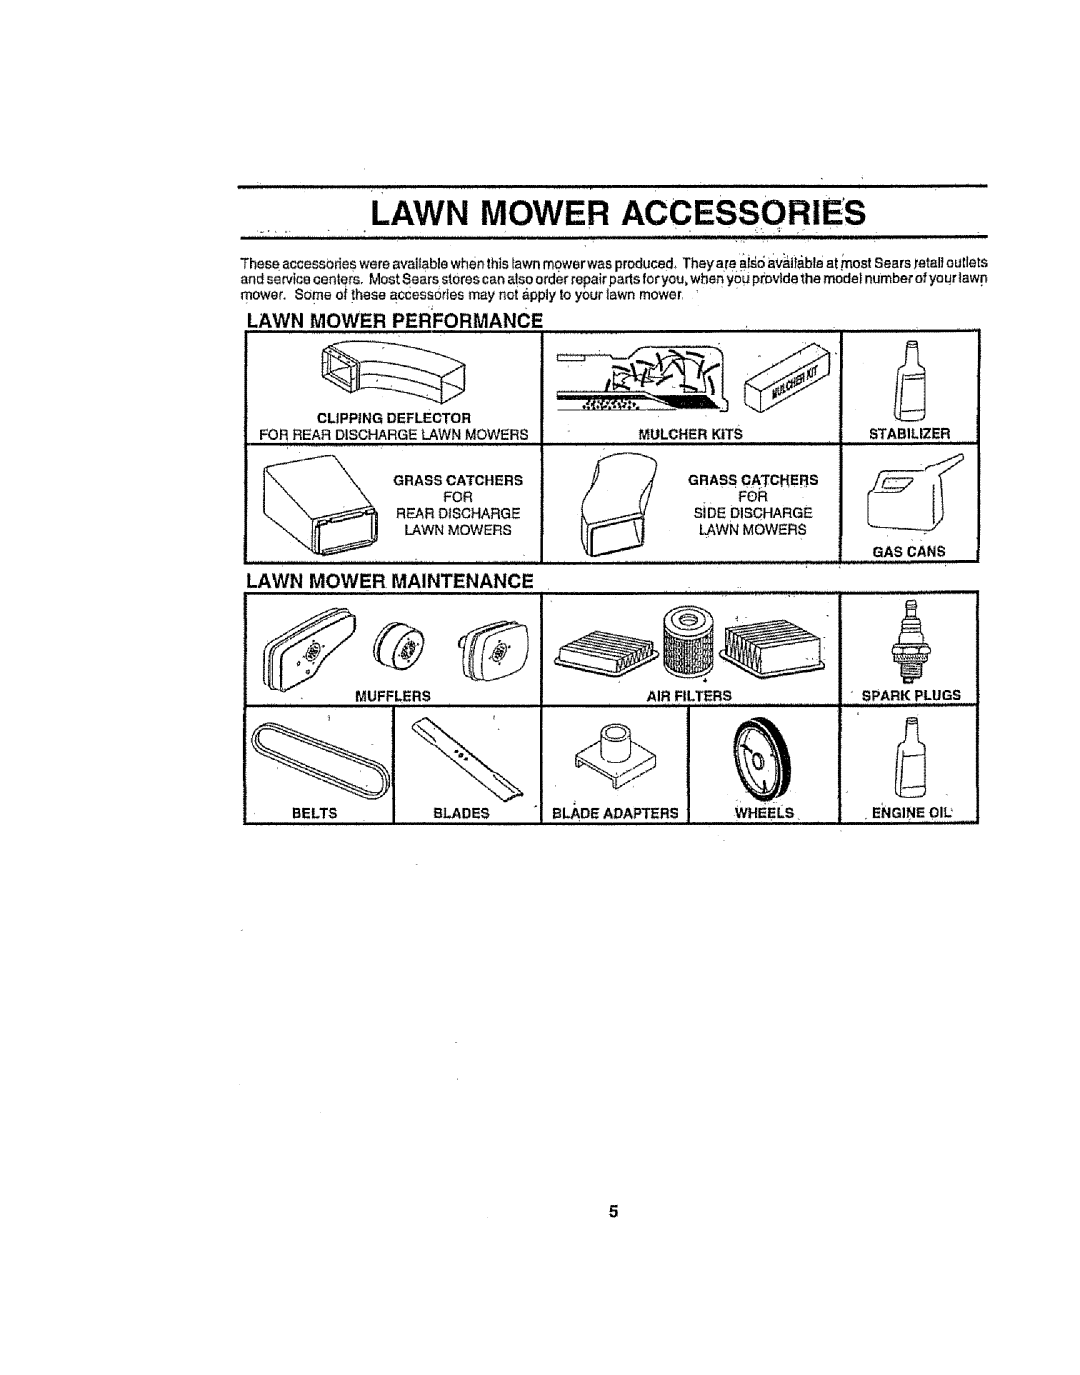 Sears 917386121 owner manual Lawn Mower Accessories, Lawn Mower Performance, Lawn Mower. Maintenance, • ENGNEolk 